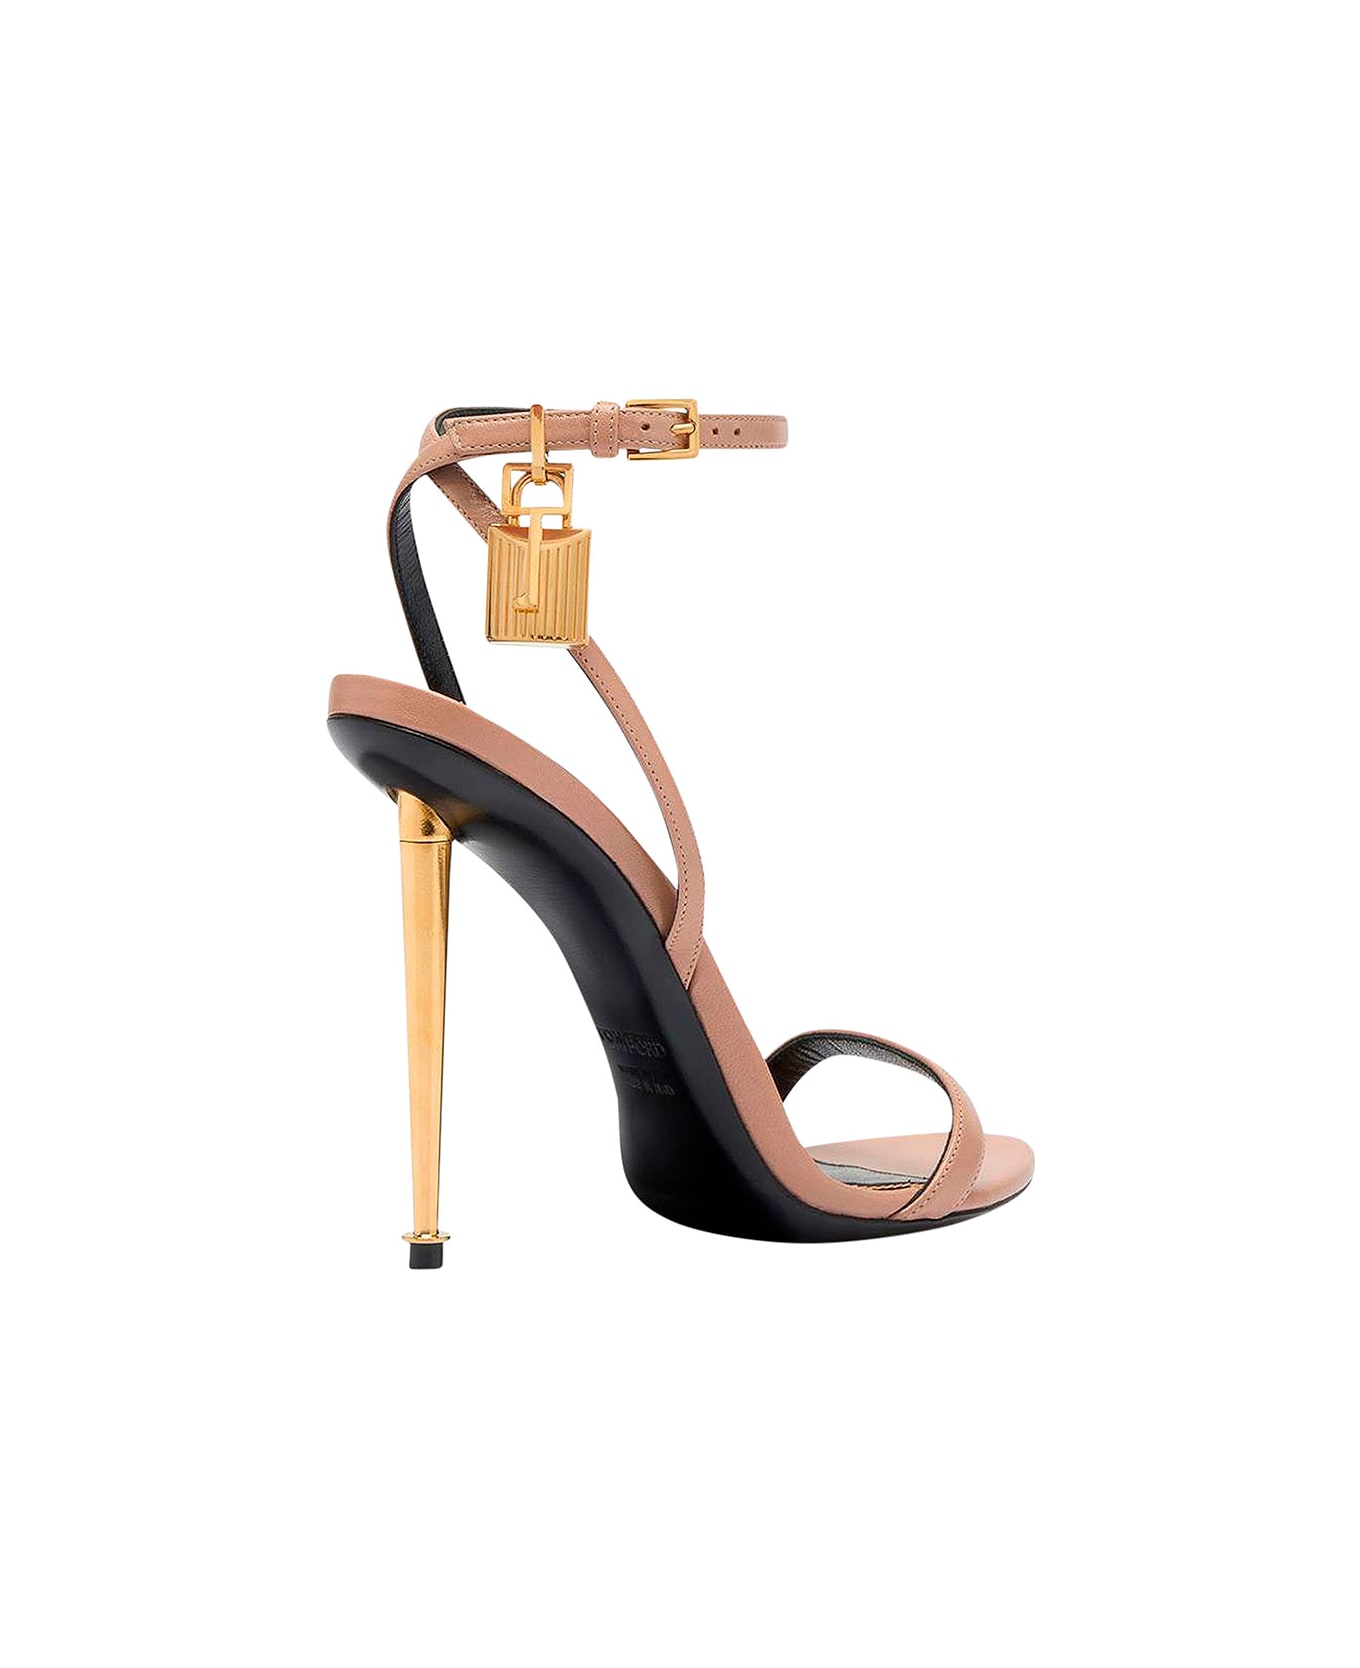 Tom Ford Pink Sandals With Metal Heel And Padlock In Leather Woman - Metallic